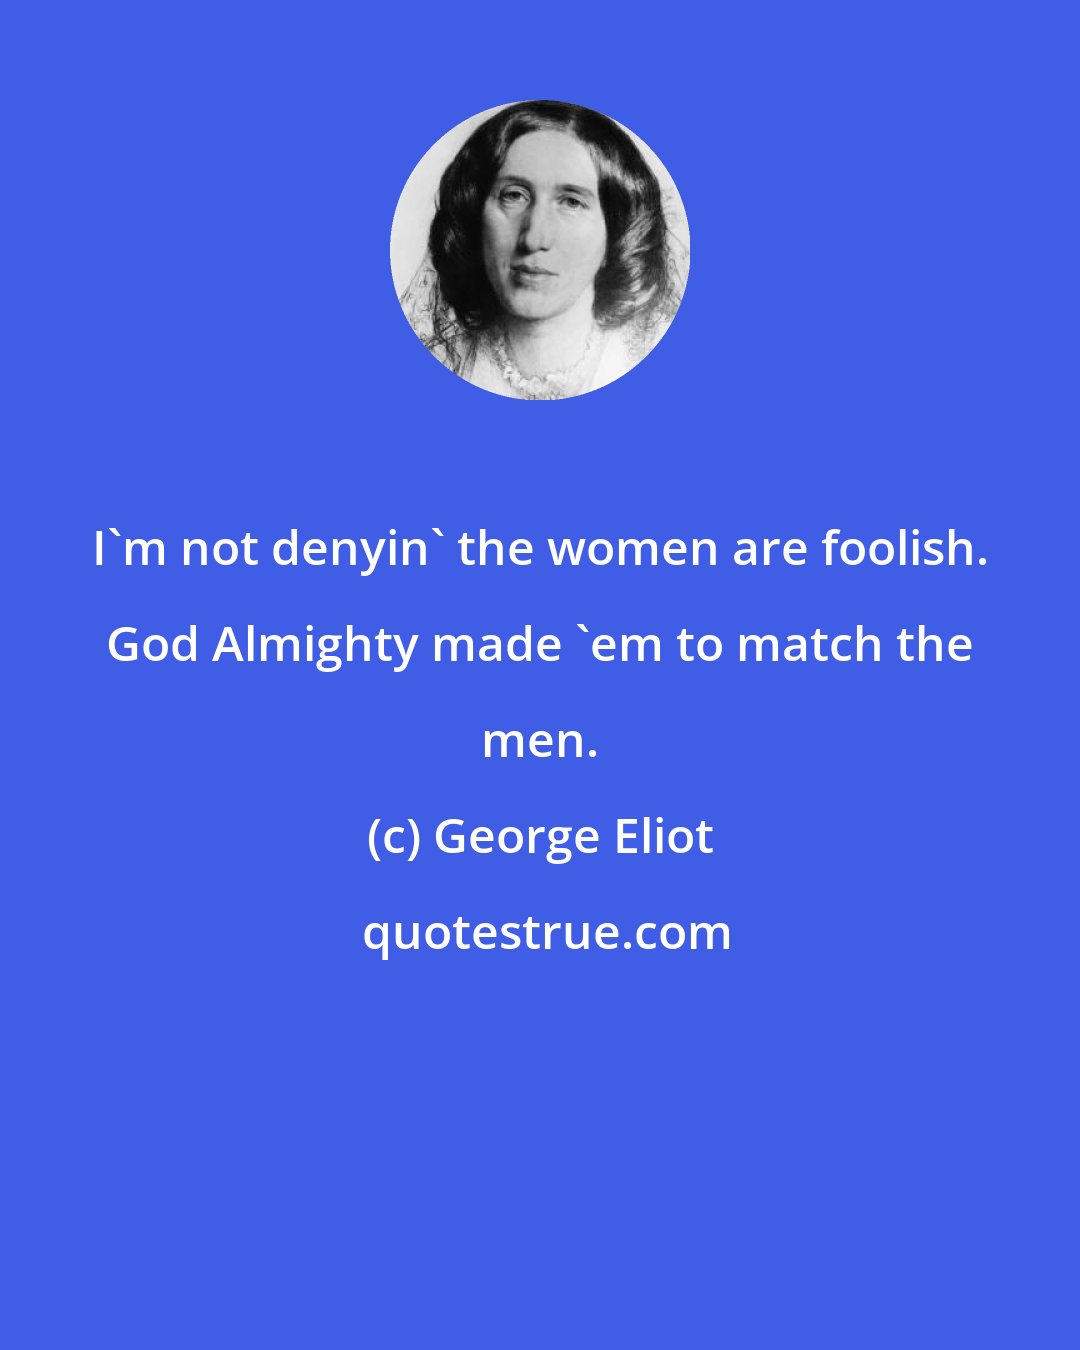 George Eliot: I'm not denyin' the women are foolish. God Almighty made 'em to match the men.